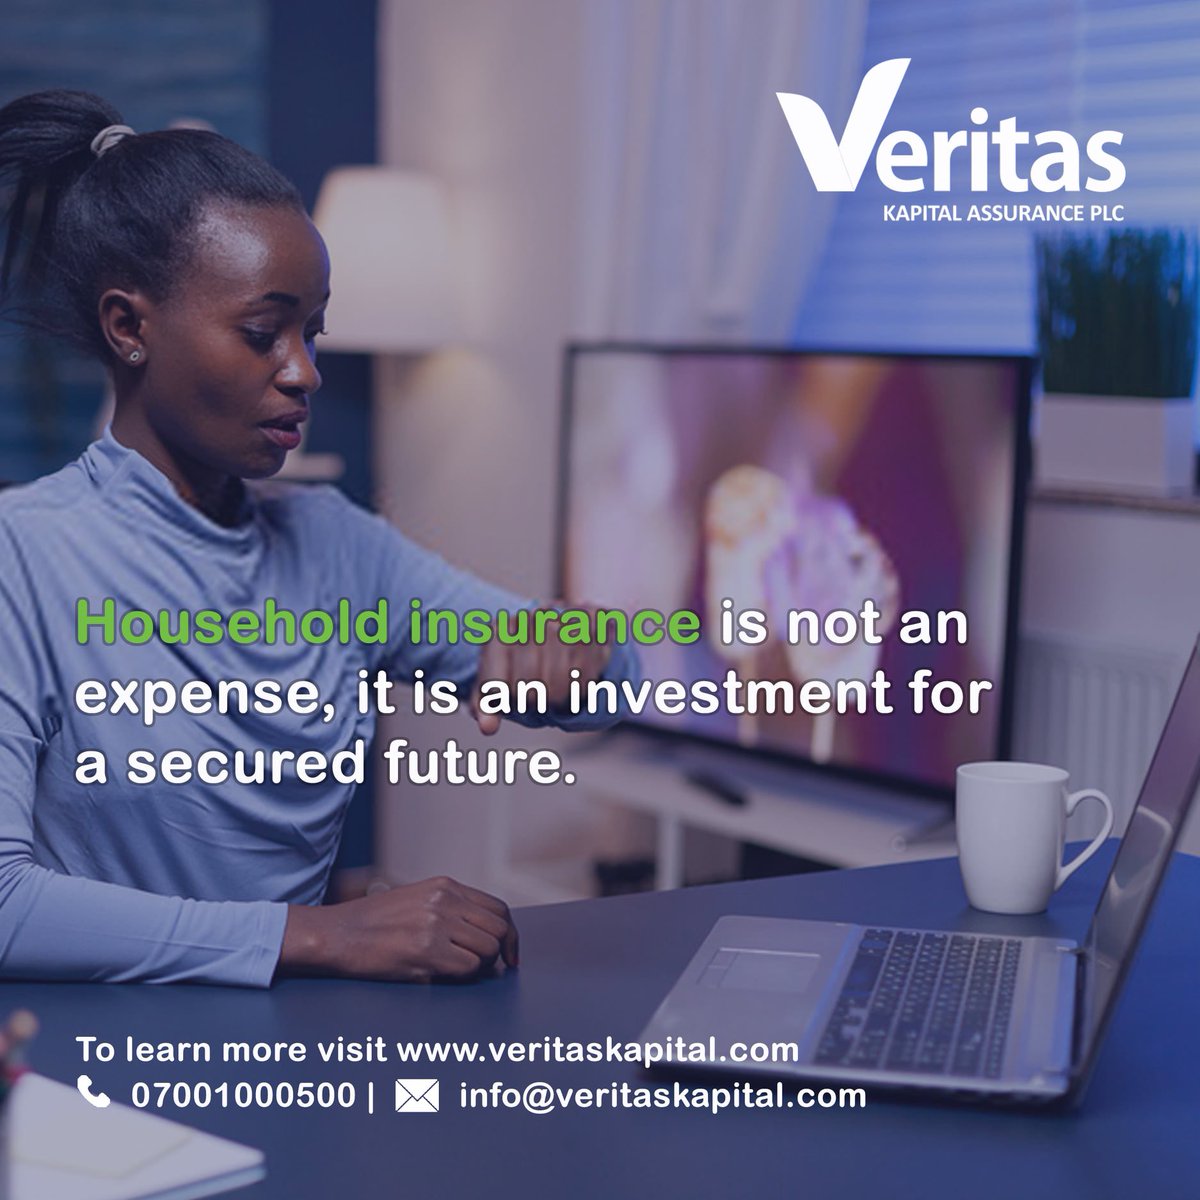 Household insurance is not an expense, it is an investment for a secured future.
 
#homeinsurance #insurance #autoinsurance #businessinsurance #carinsurance #insuranceagent #insurancebroker #insuranceagency #business #home #insurancepolicy #insurancequote #family #VKA